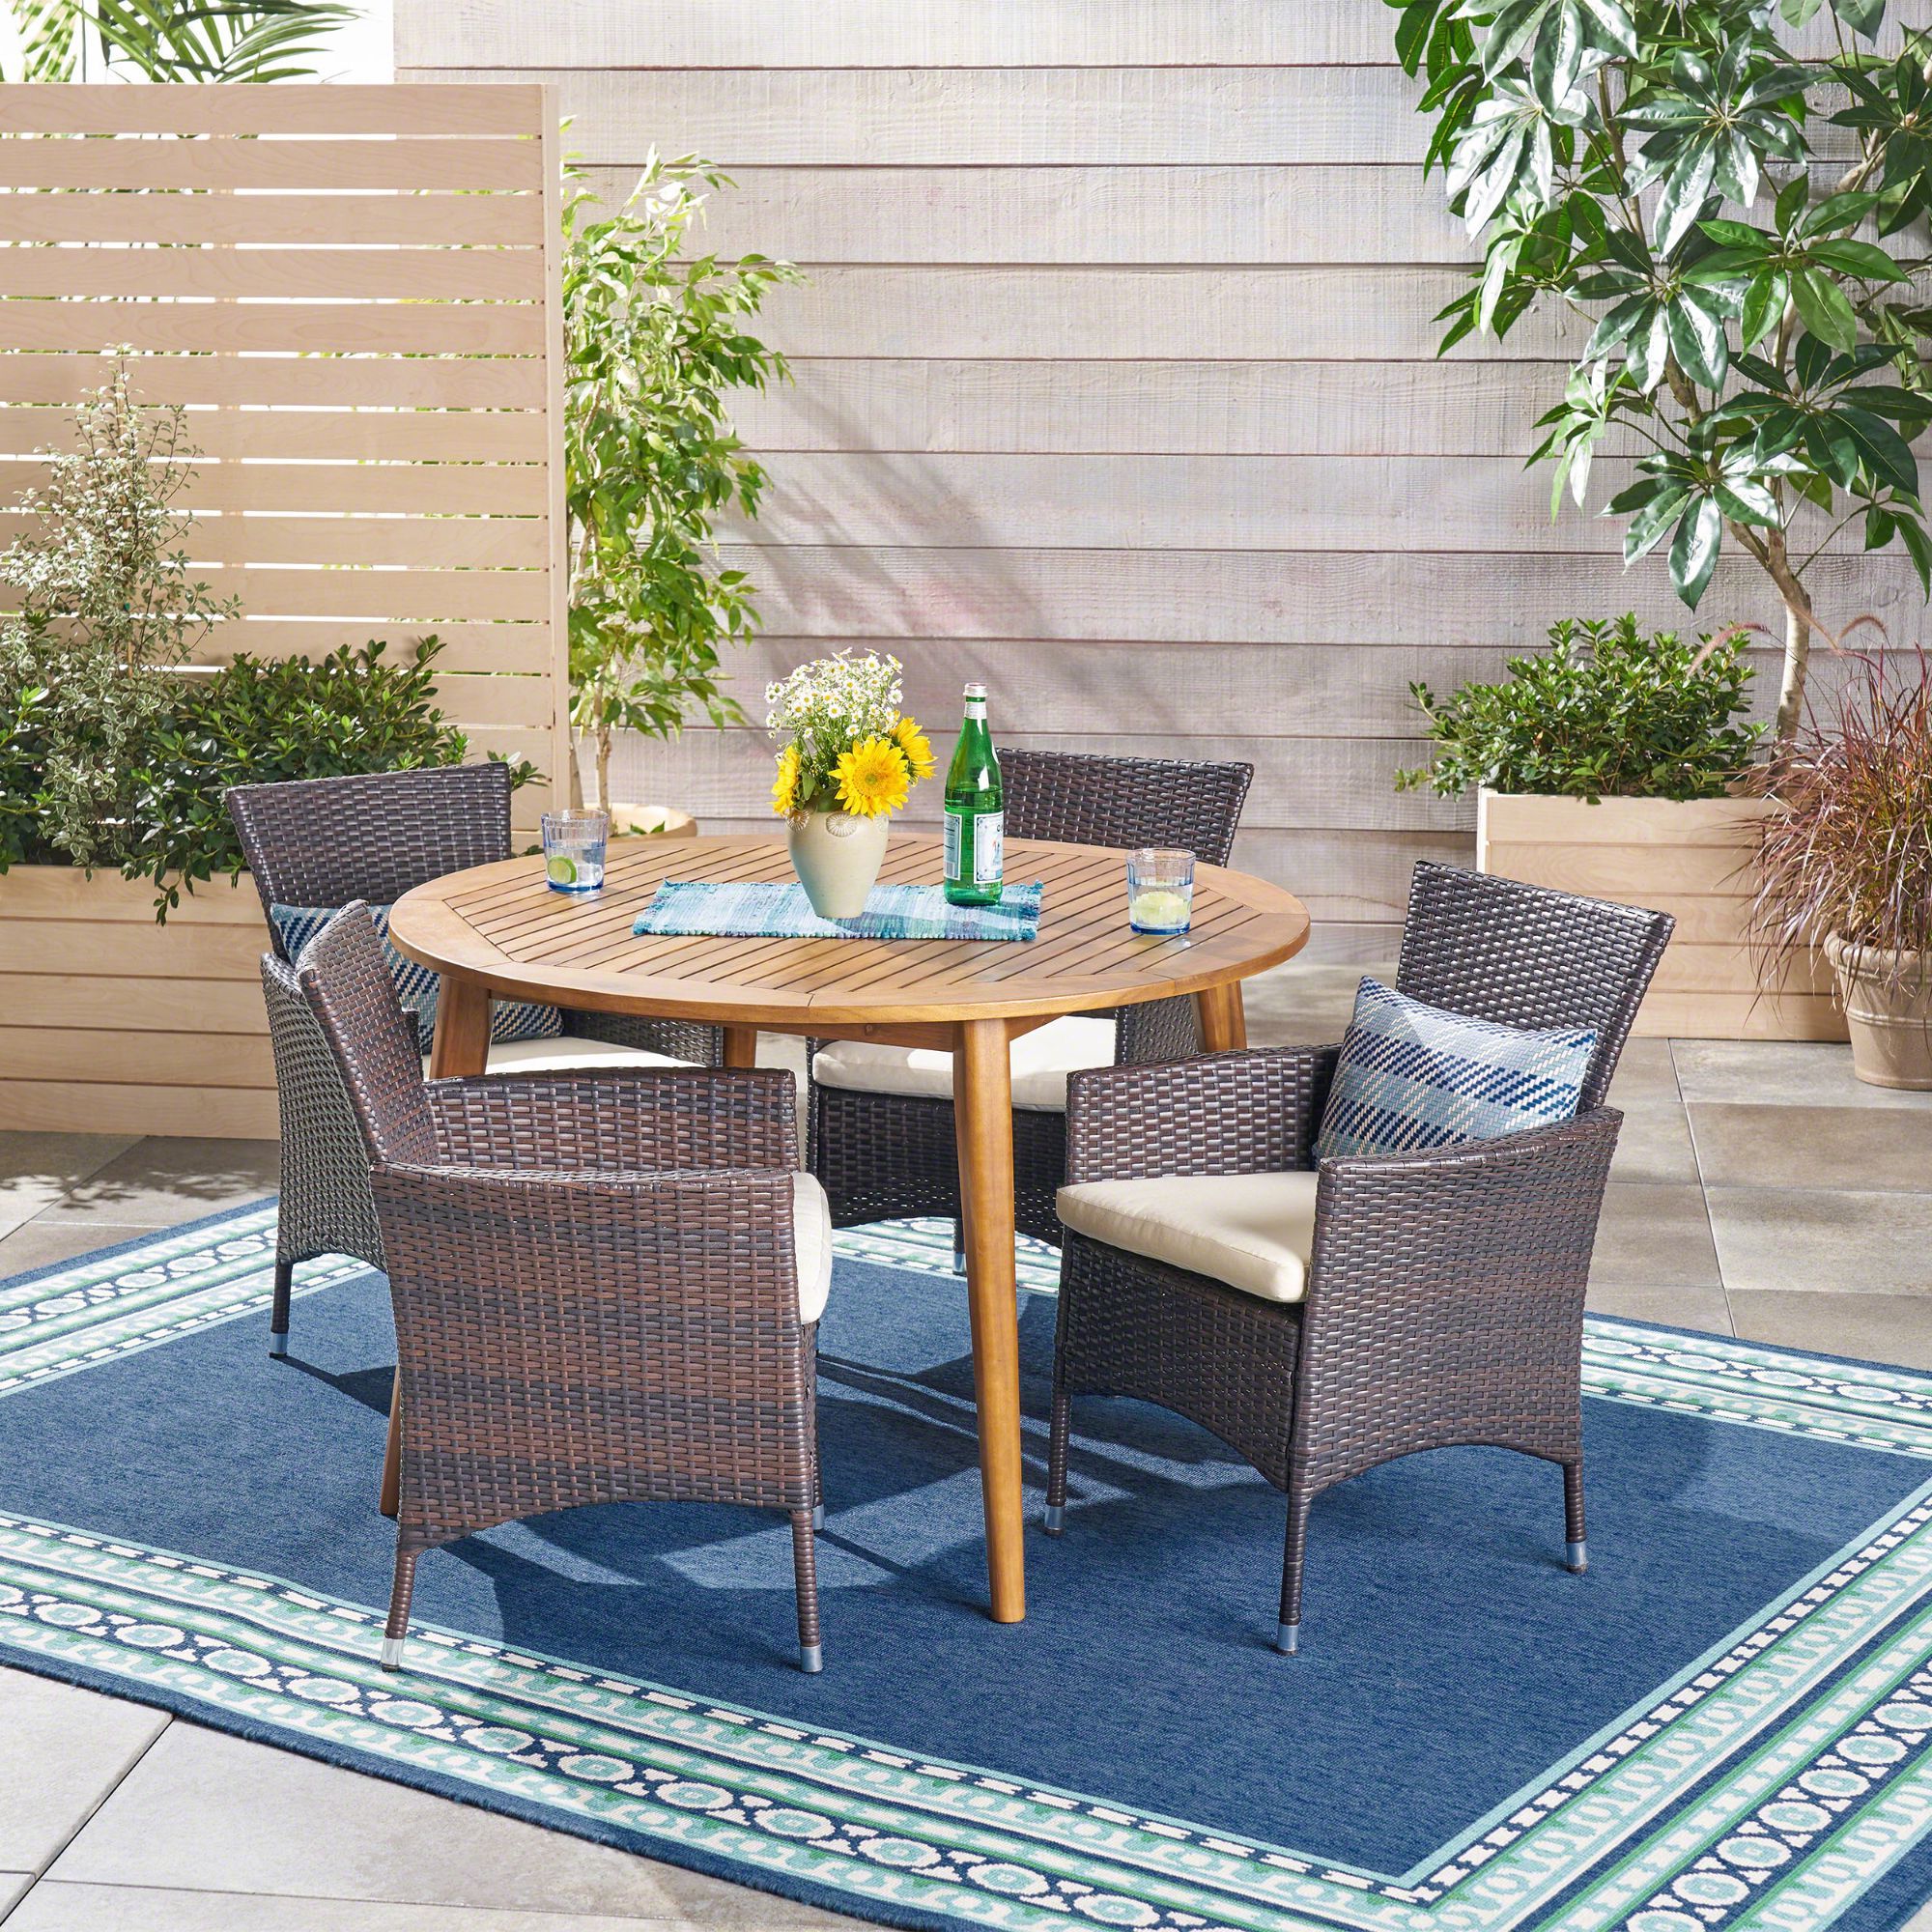 Fashionable 5 Piece Brown Wicker Finish Round Outdoor Furniture Patio Dining Set Pertaining To 5 Piece Round Patio Dining Sets (View 4 of 15)